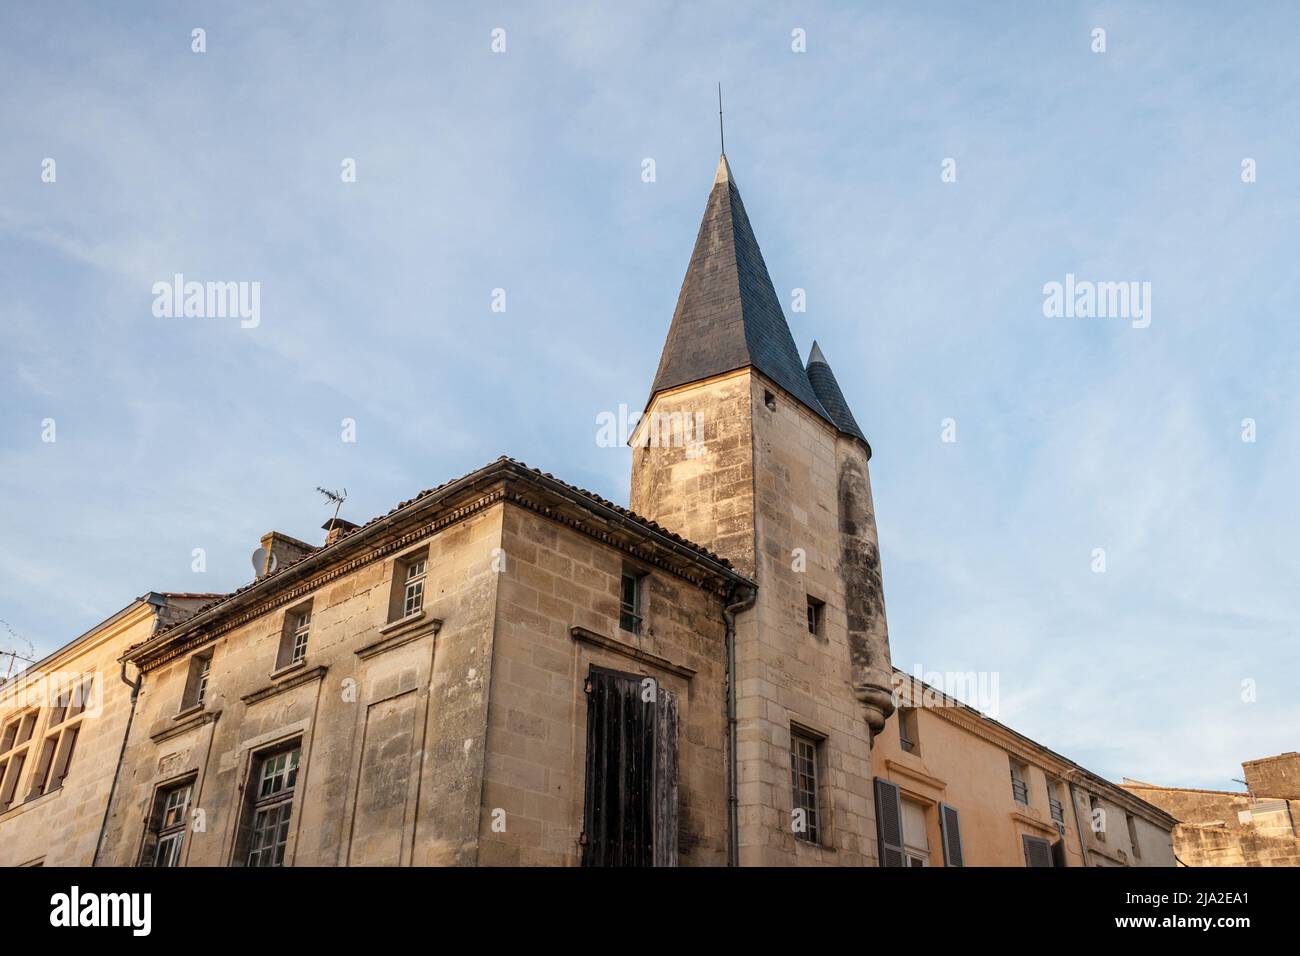 Picture of an old medieval tower and a facade of a residential building in the city center of Libourne, France. Libourne is a commune in the Gironde d Stock Photo